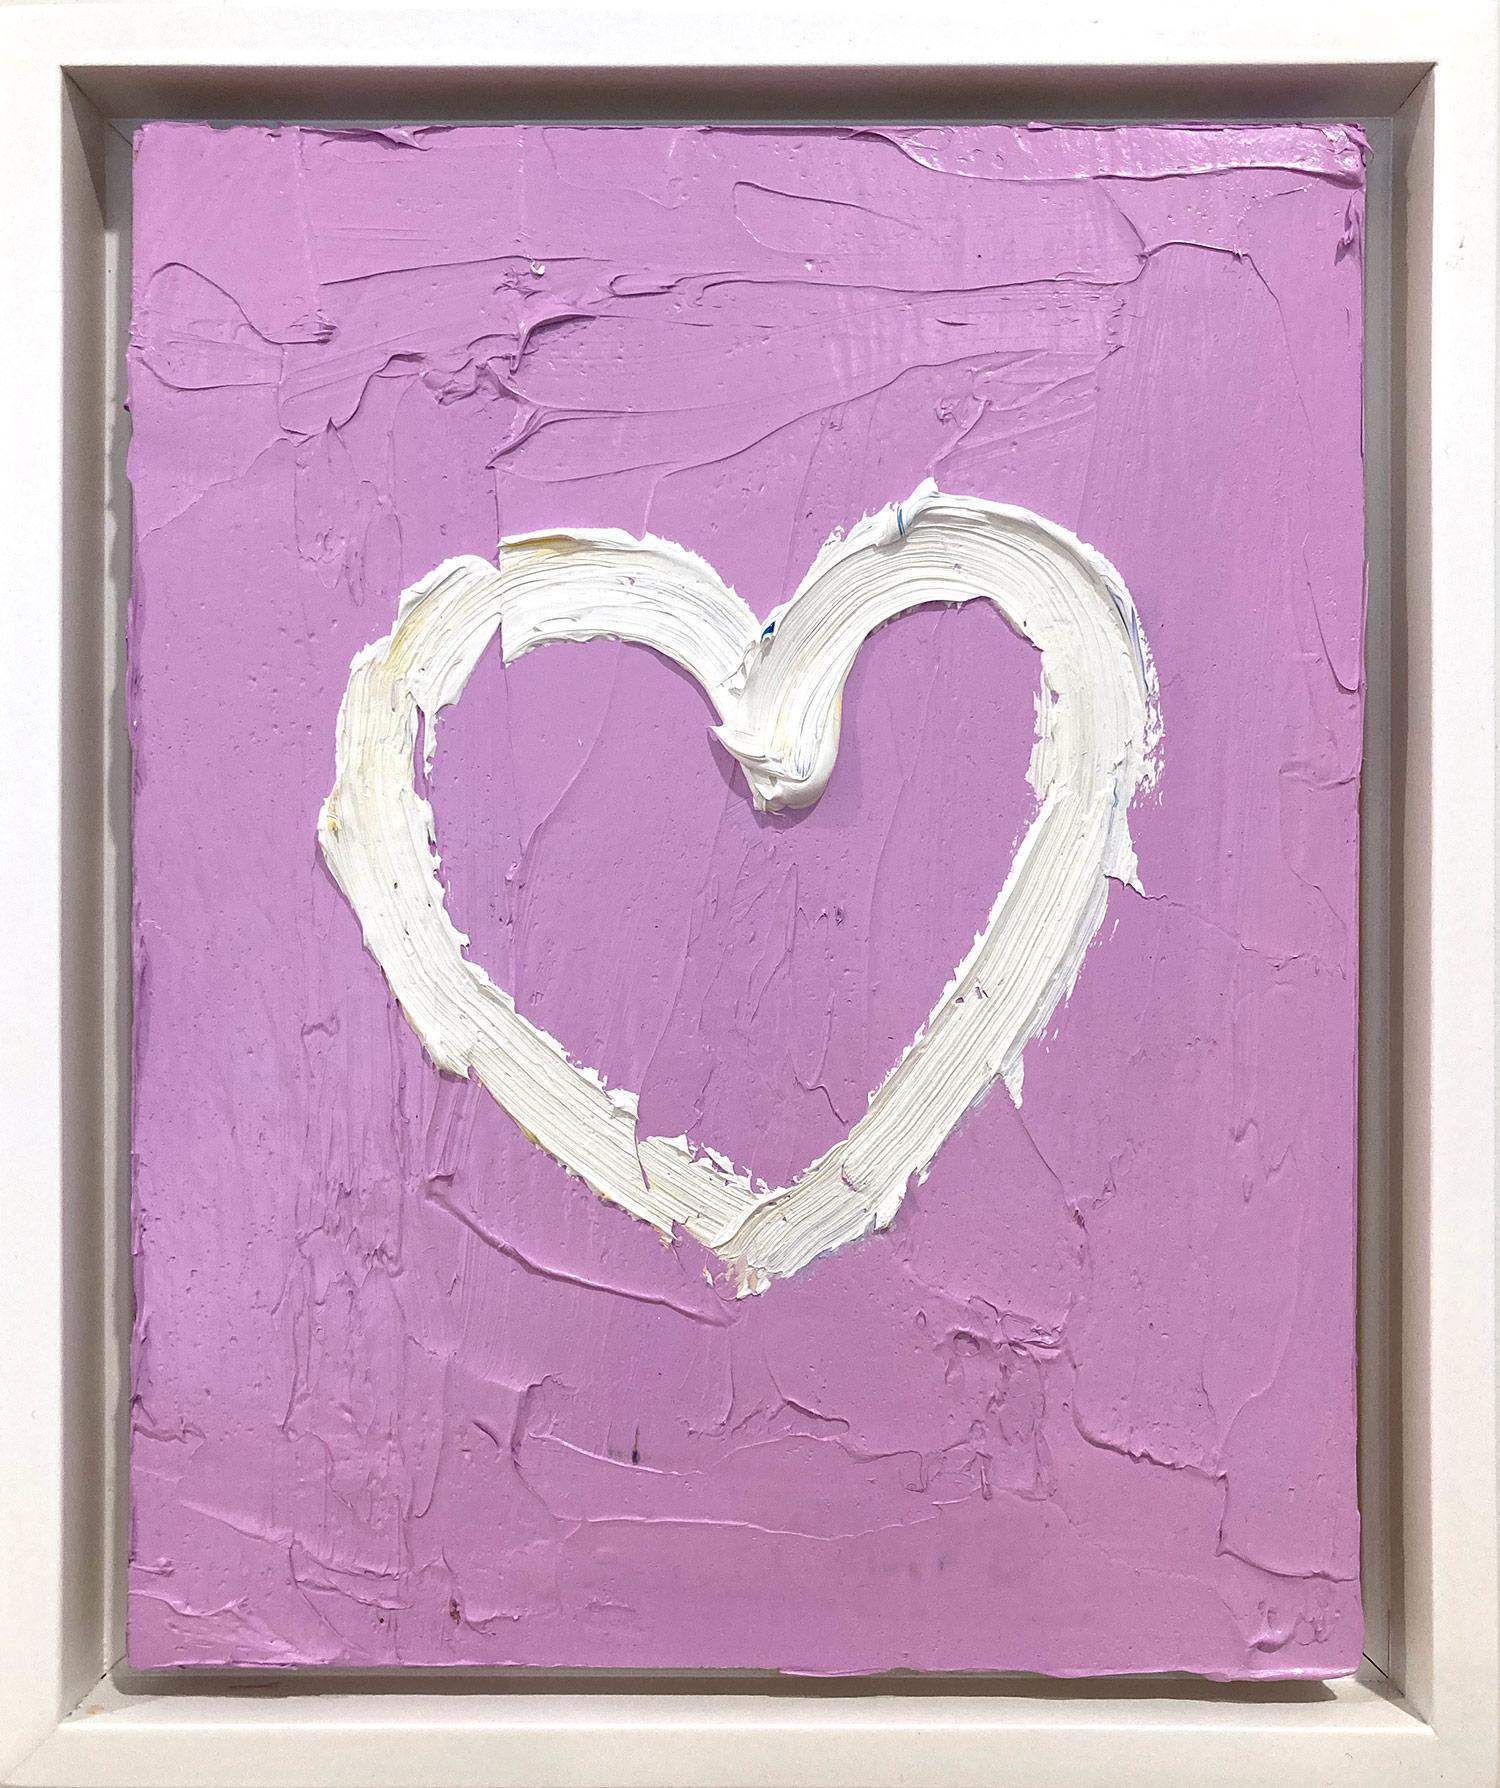 Cindy Shaoul Figurative Painting - "My Bubble Gum Pink Heart" Contemporary Oil Painting Framed with Floater Frame